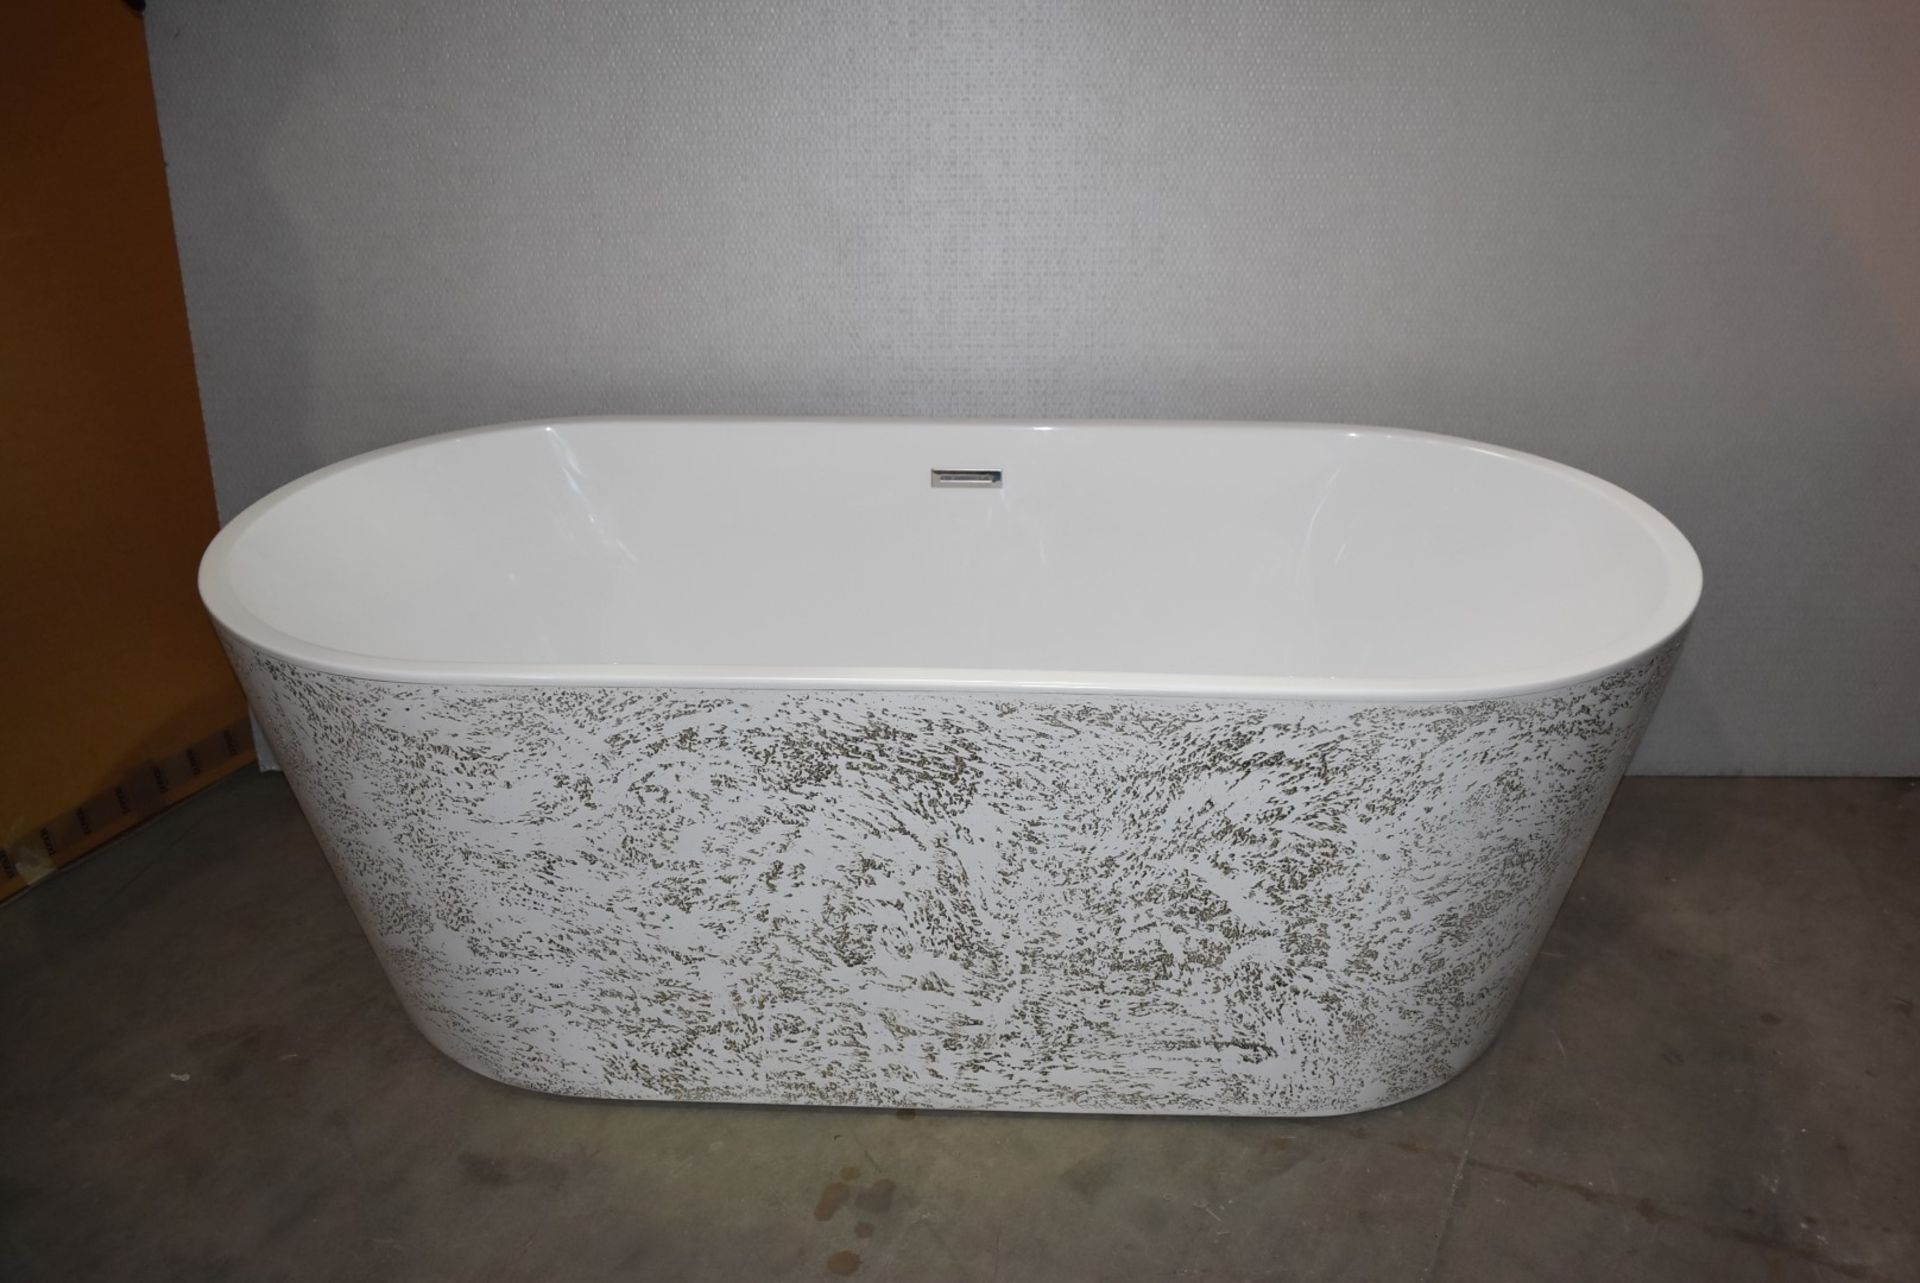 1 x Contemporary Freestanding Bath With a Tactile Textured Surround Panel - 1690mm Wide - New - Image 4 of 15